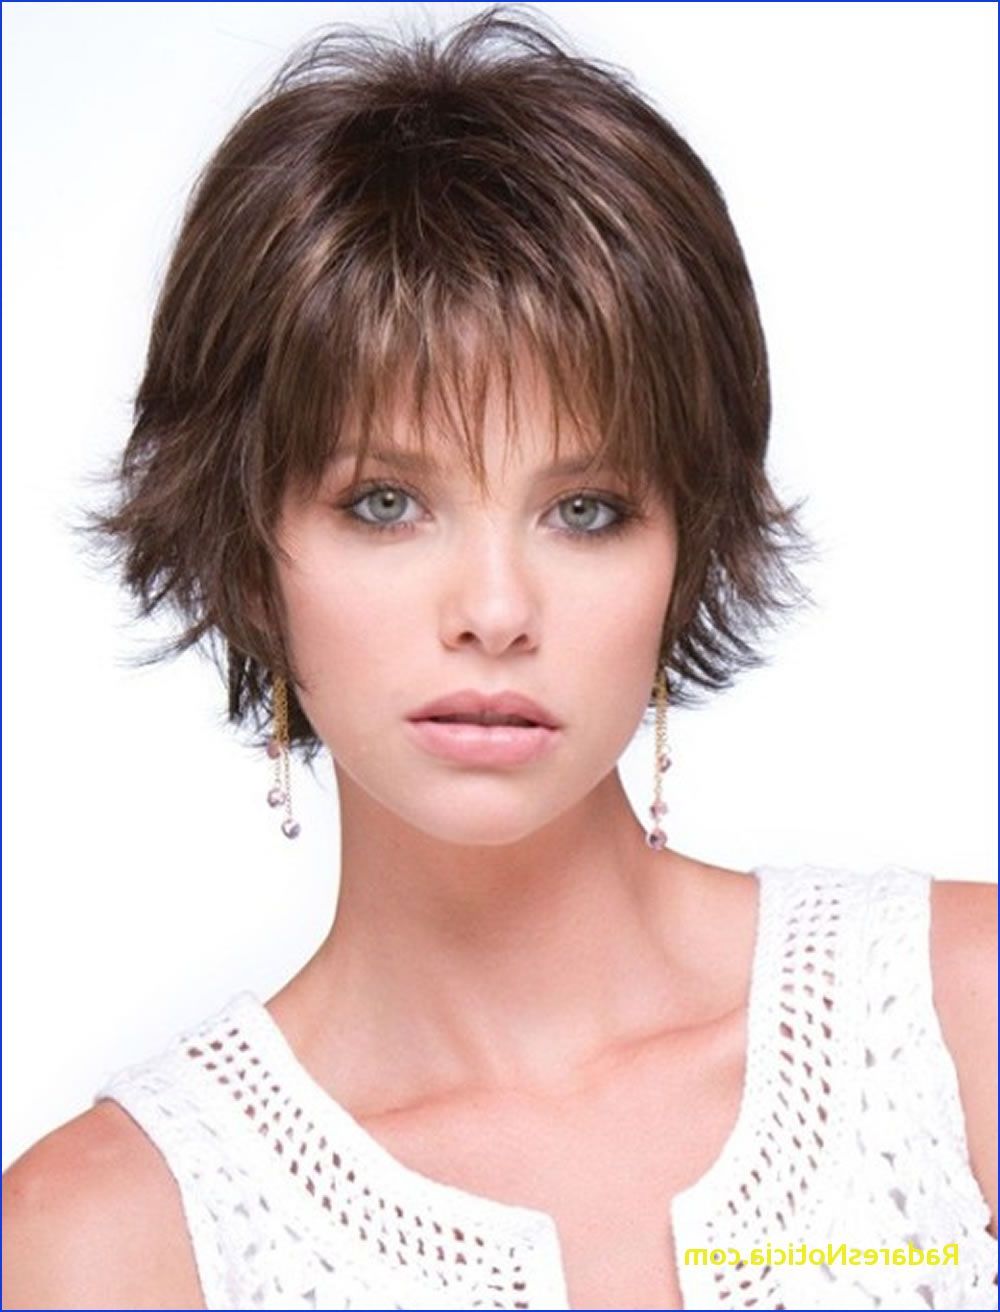 Short Hairstyles For Round Faces Short Haircuts For Round Face Thin Pertaining To Short Hairstyles With Bangs And Layers For Round Faces (View 21 of 25)